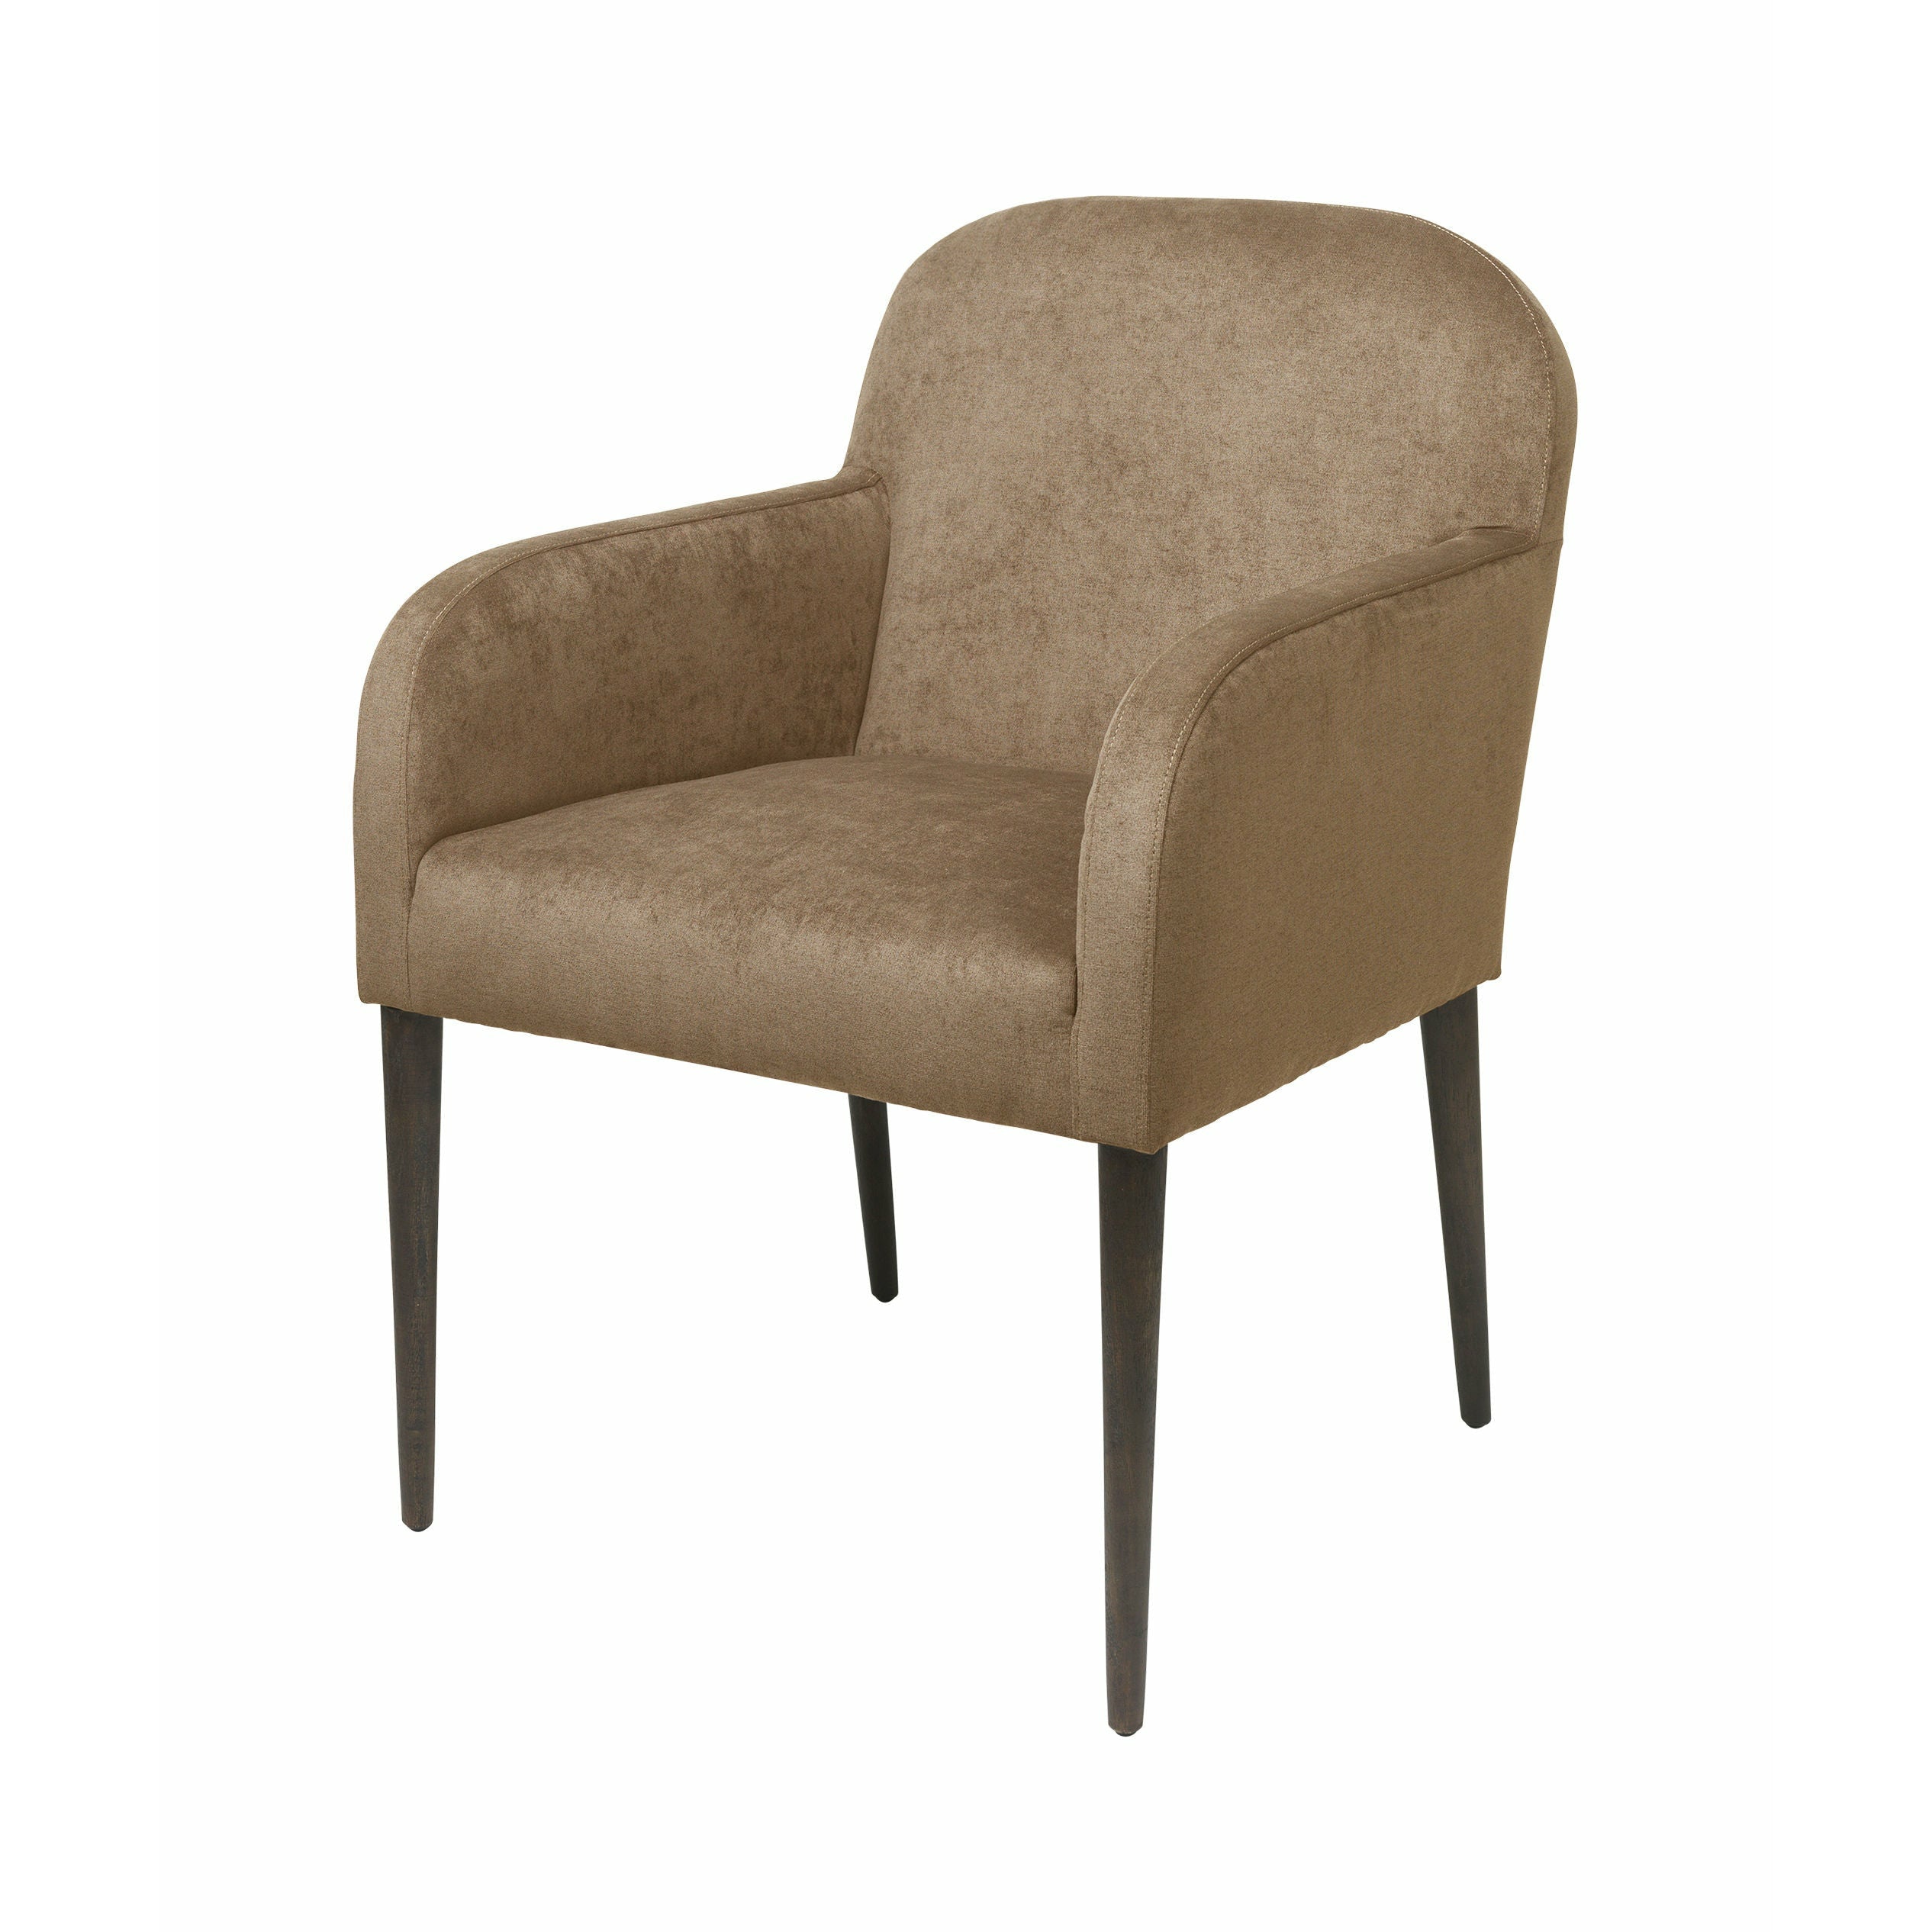 Cosy Living Gotland Dining Chair - Latte*